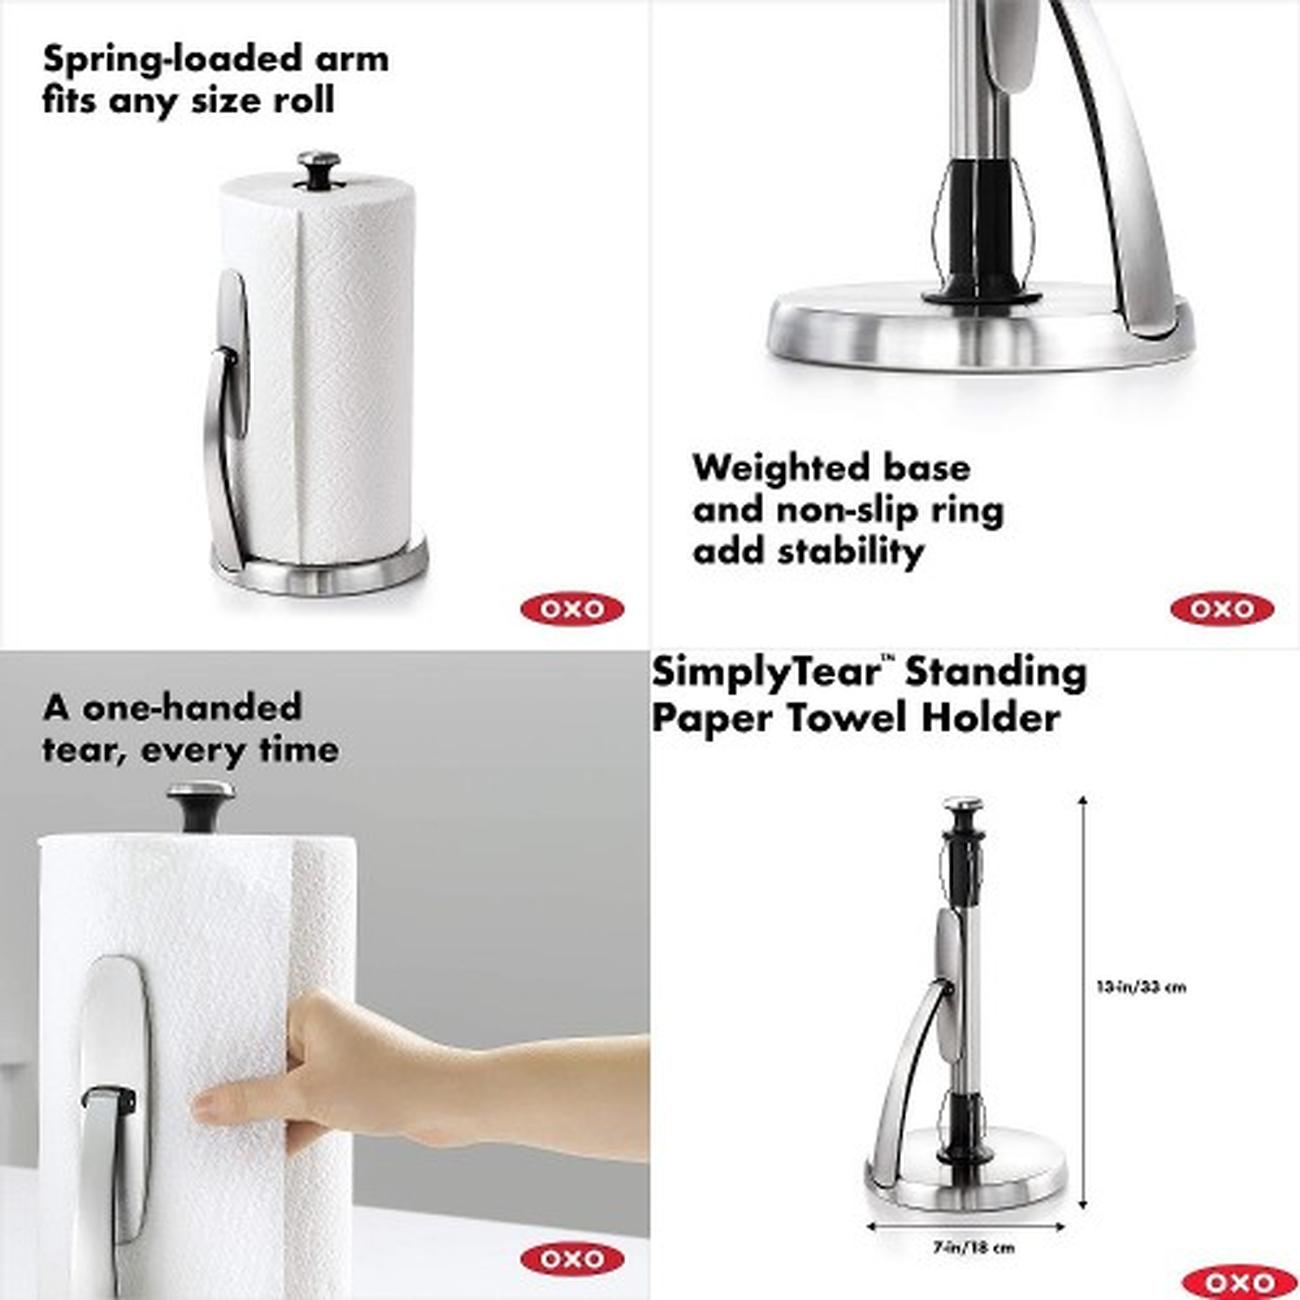 https://www.thekitchenwhisk.ie/contentfiles/productImages/Large/OXO-SimplyTear-Paper-Towel-Holder-Good-Grips-kitchen-organisation.jpg